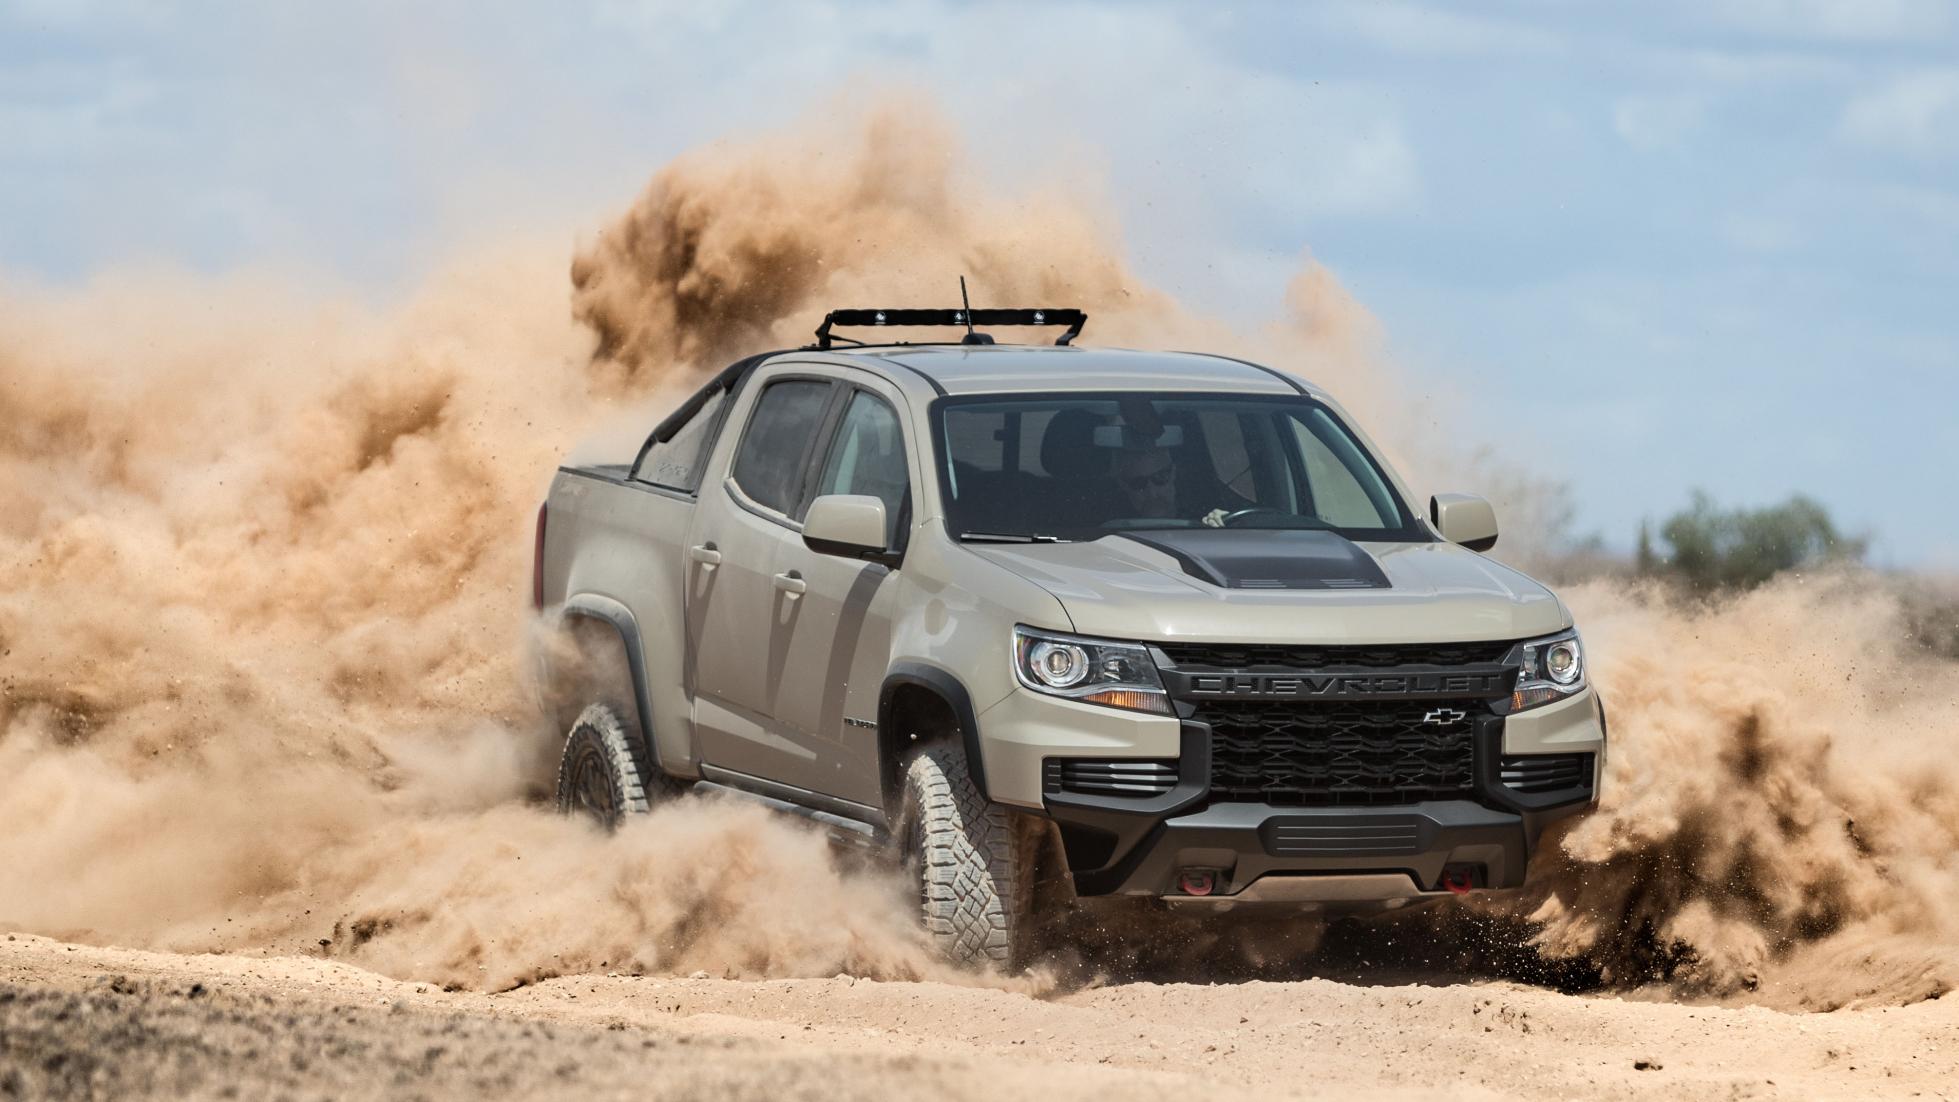 TopGear Americans the new Chevrolet Colorado ZR2 is very angry